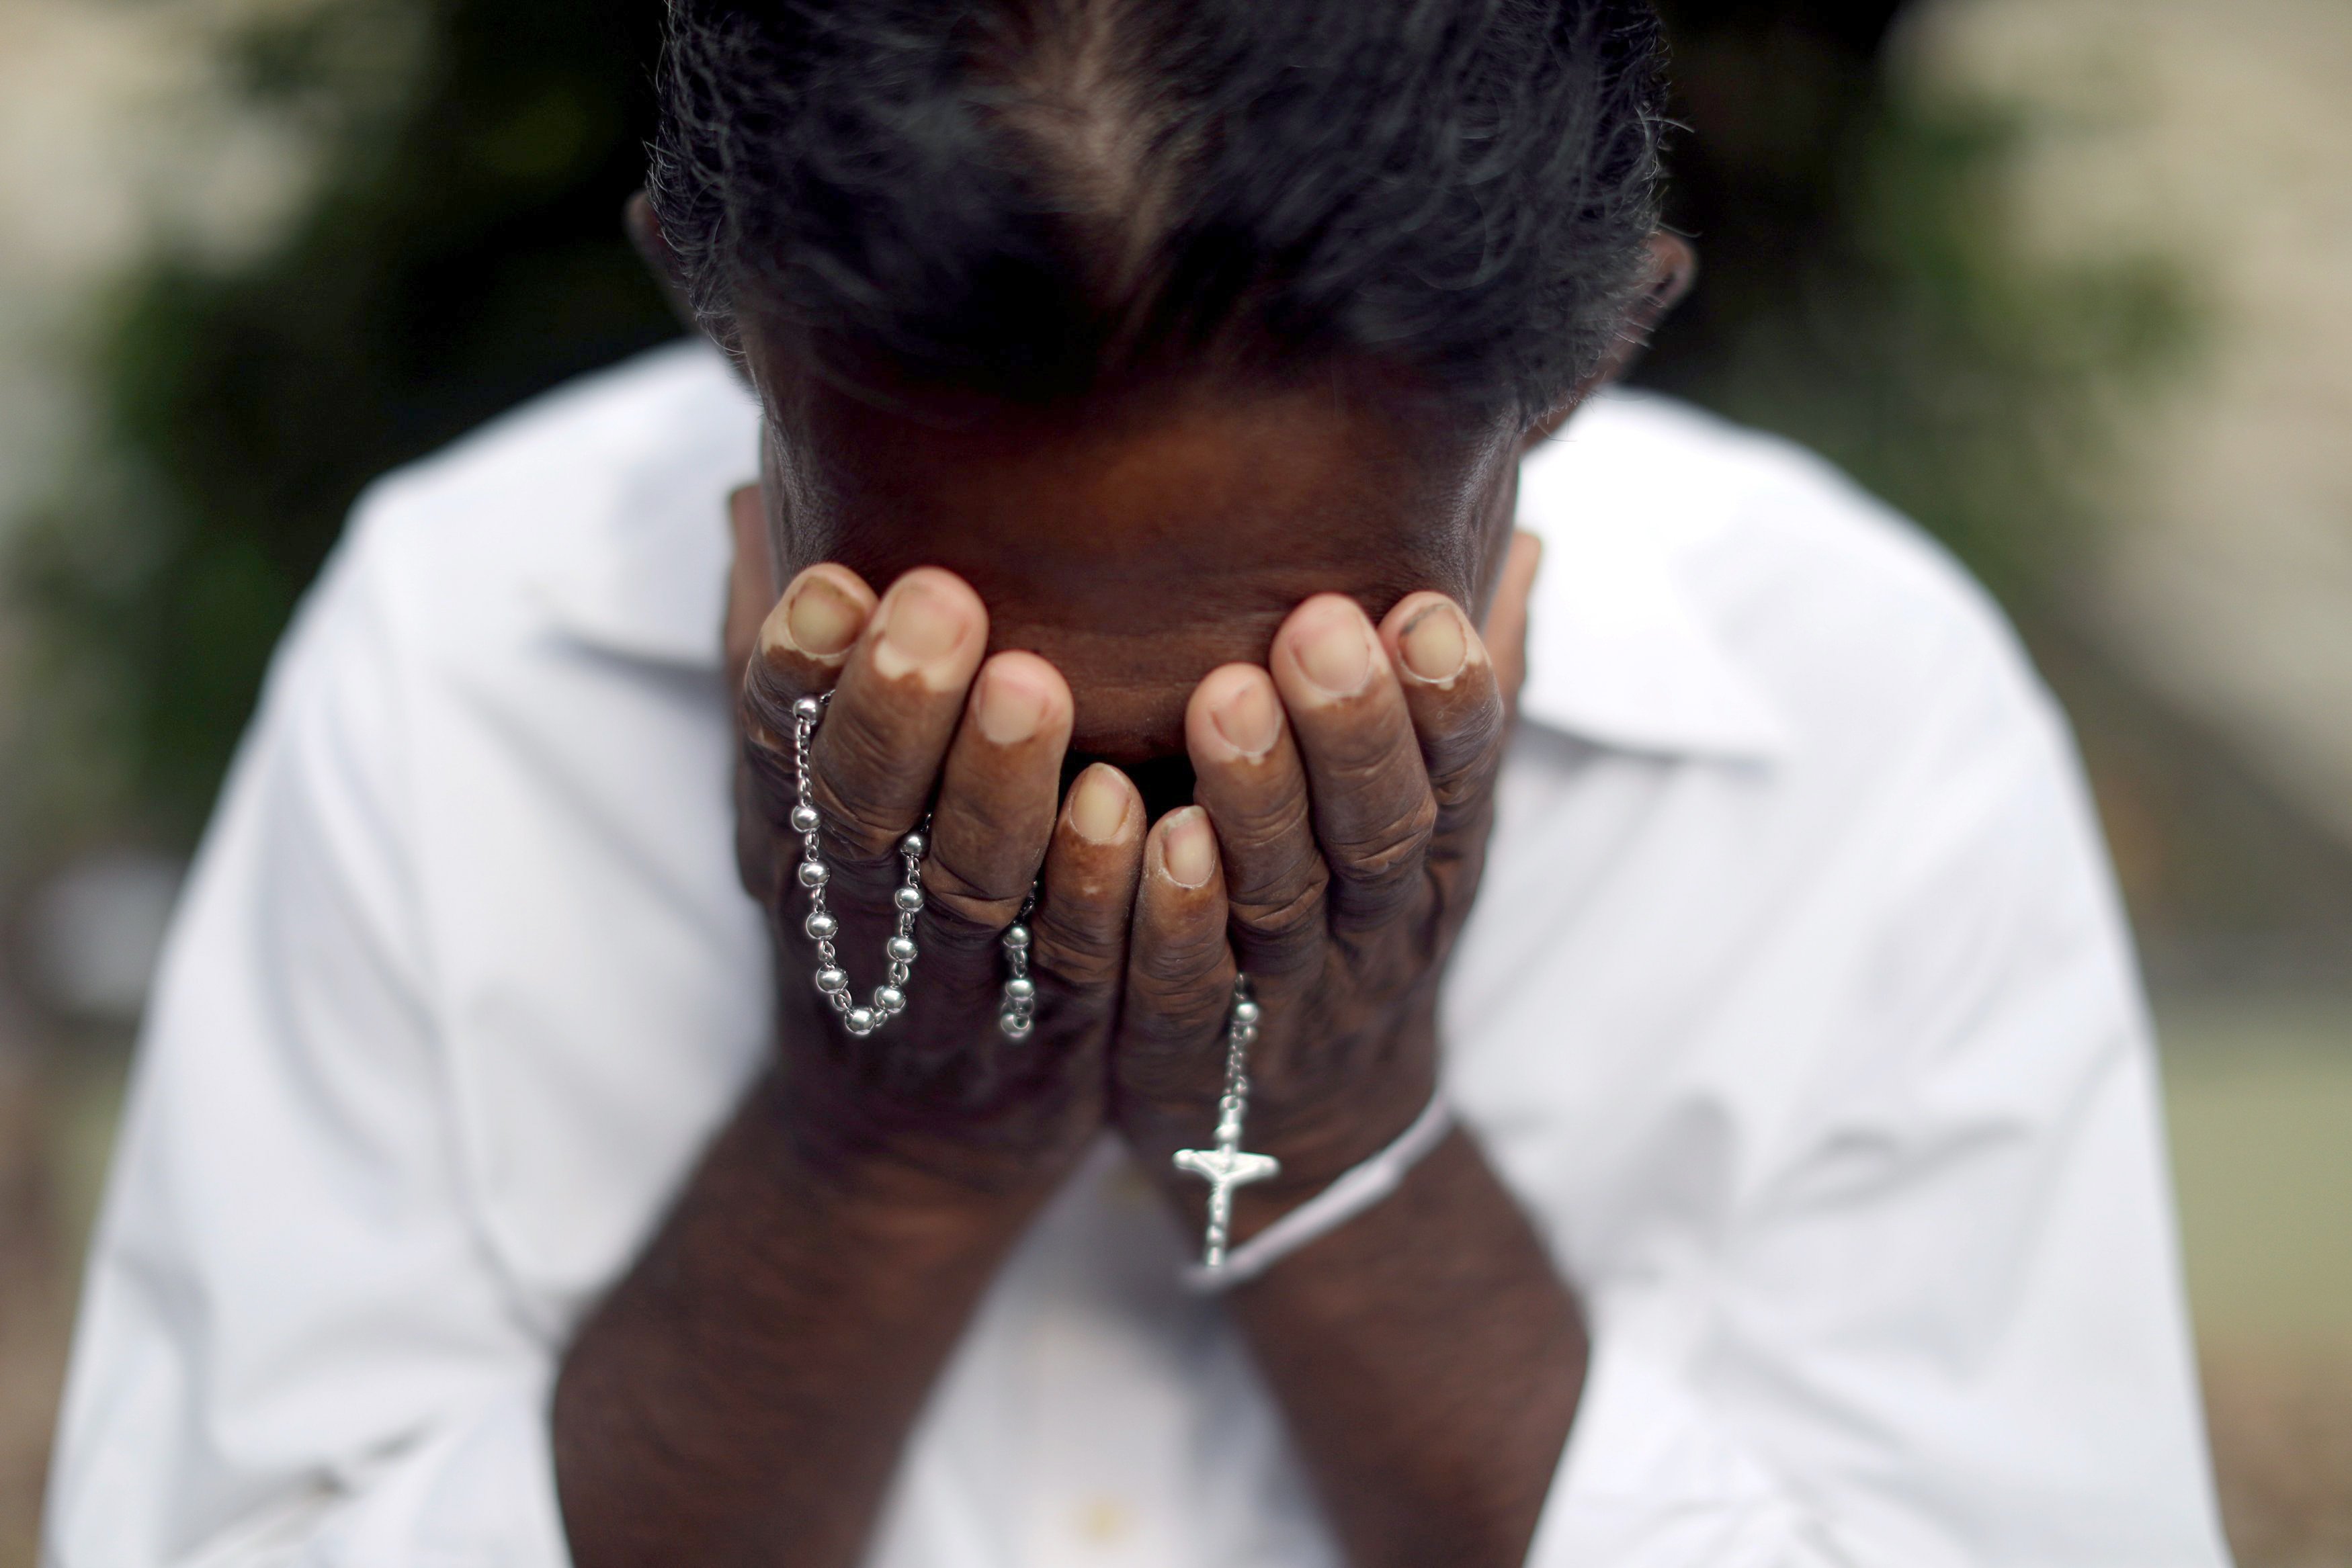 A person mourns near the grave of a suicide bombing victim at Sellakanda Catholic cemetery in Negombo, Sri Lanka, April 23, 2019. (CNS photo/Athit Perawongmetha, Reuters)